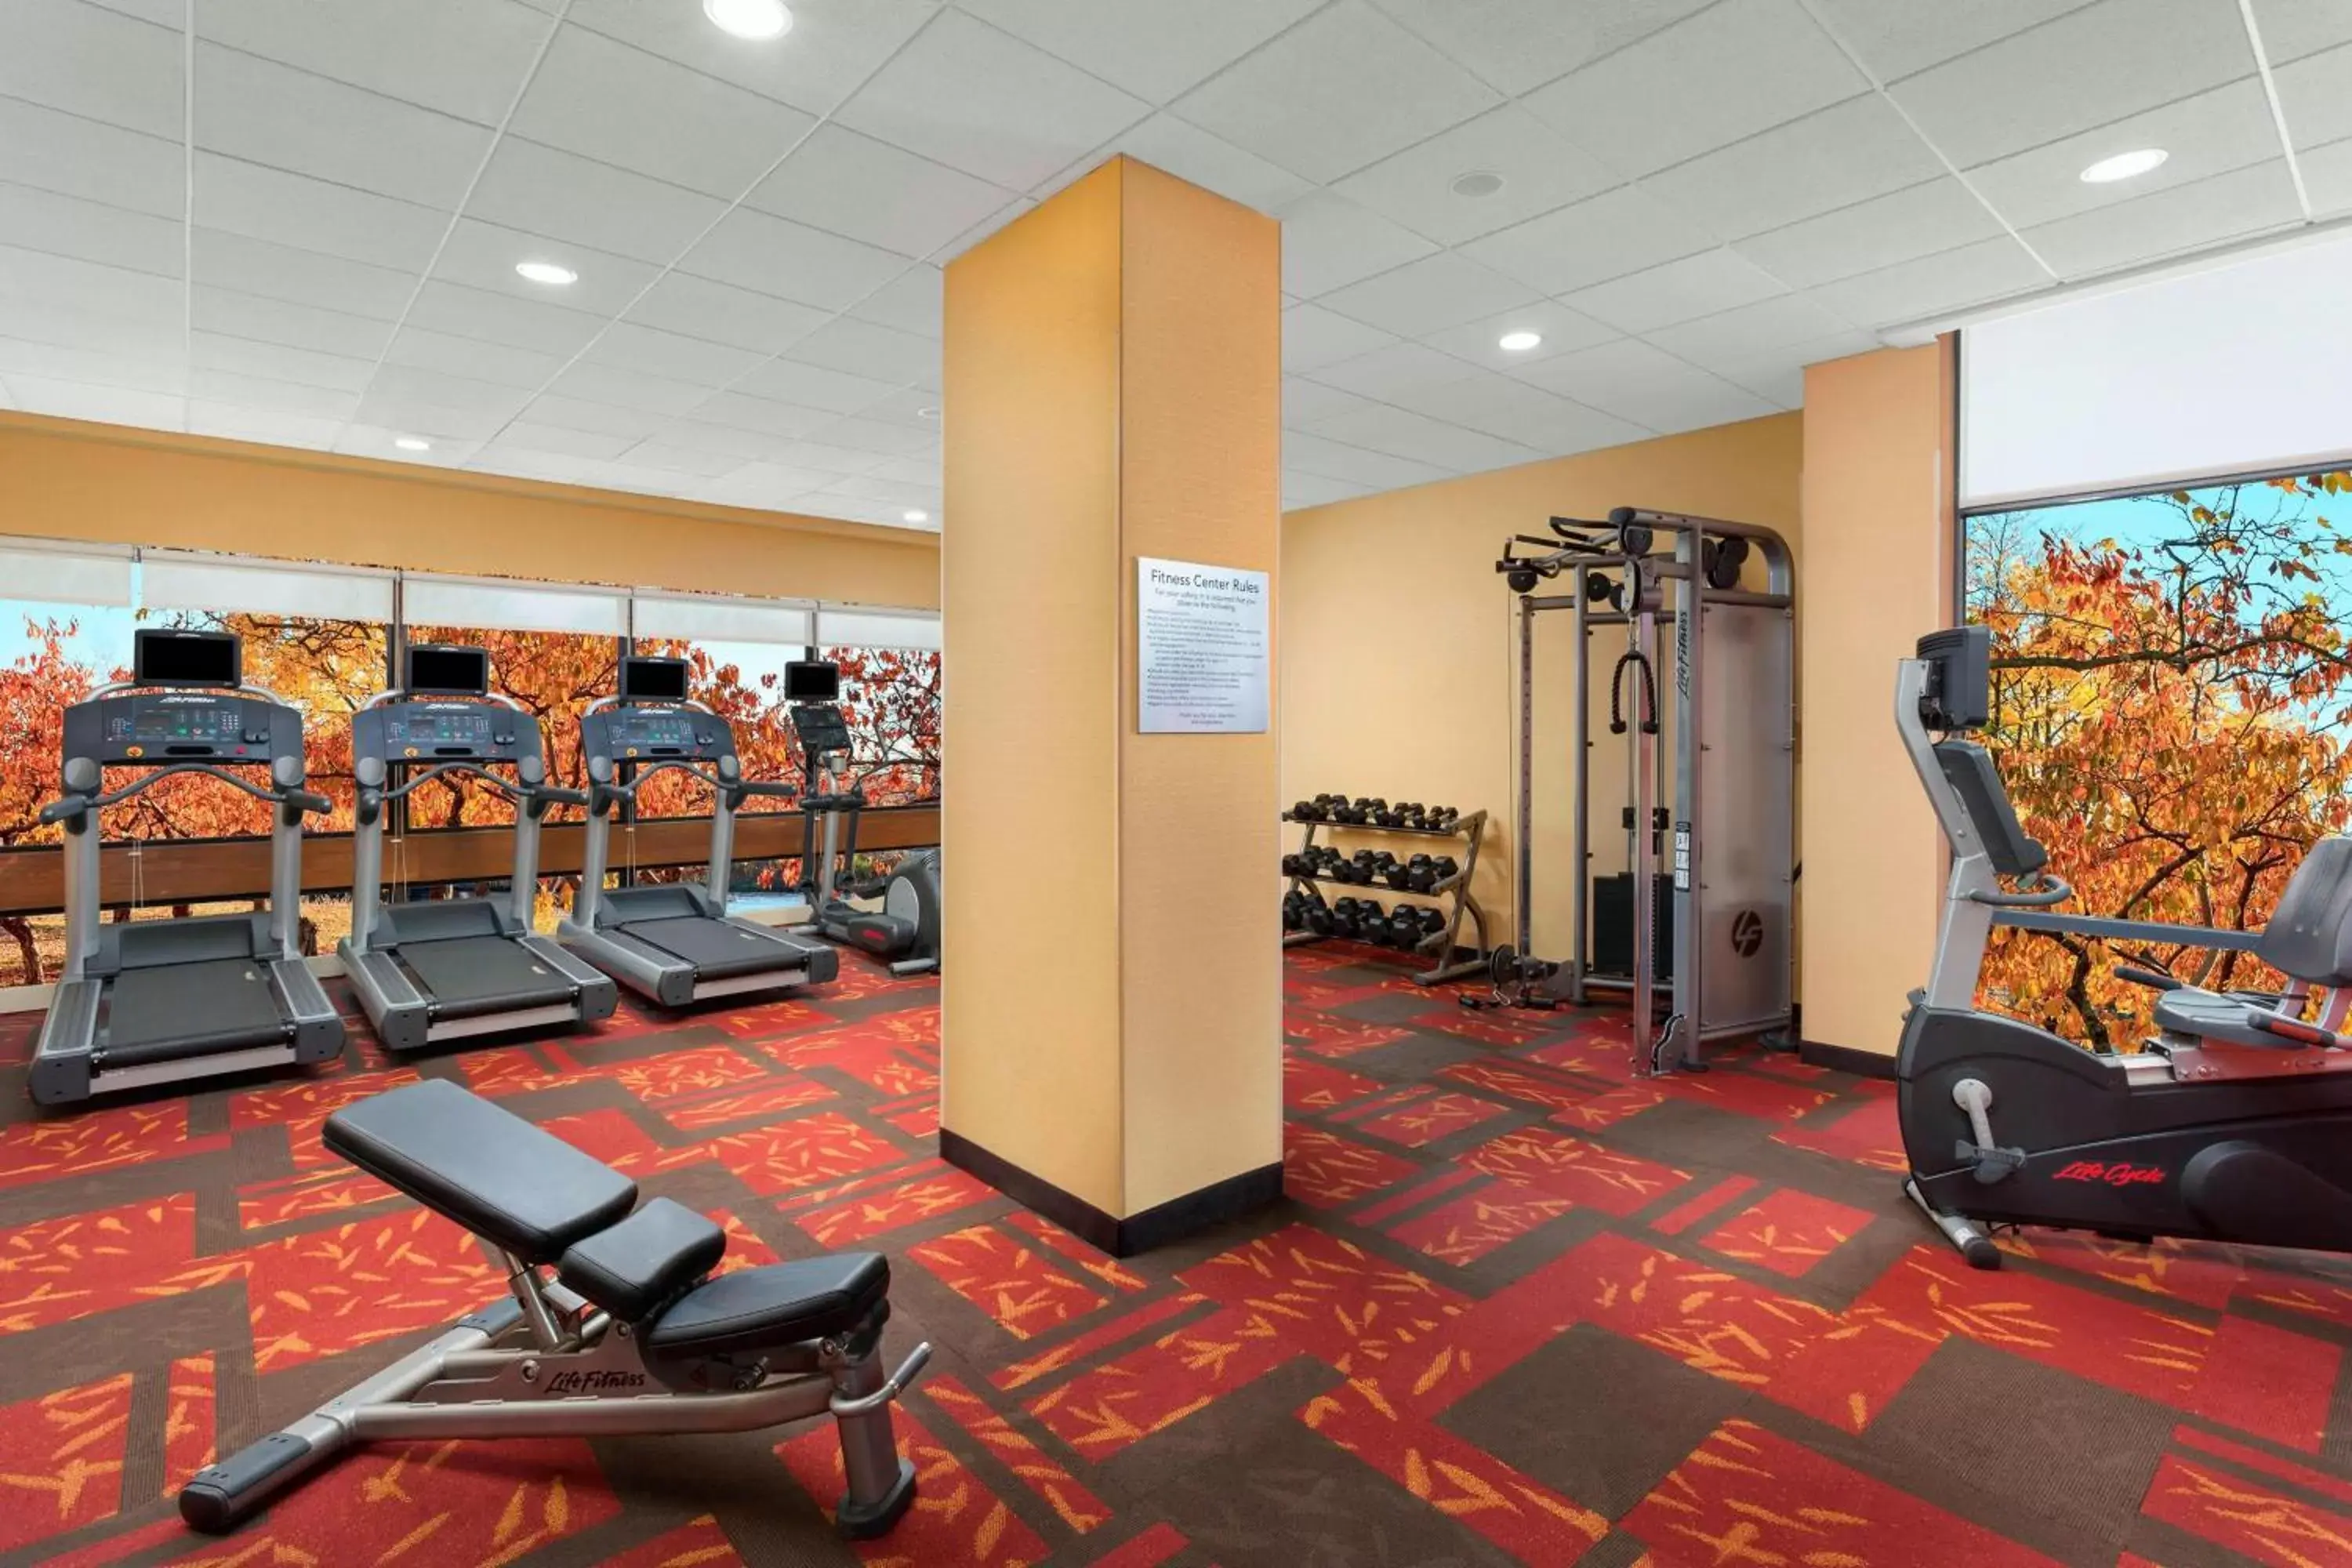 Fitness centre/facilities, Fitness Center/Facilities in Courtyard by Marriott Boston Cambridge